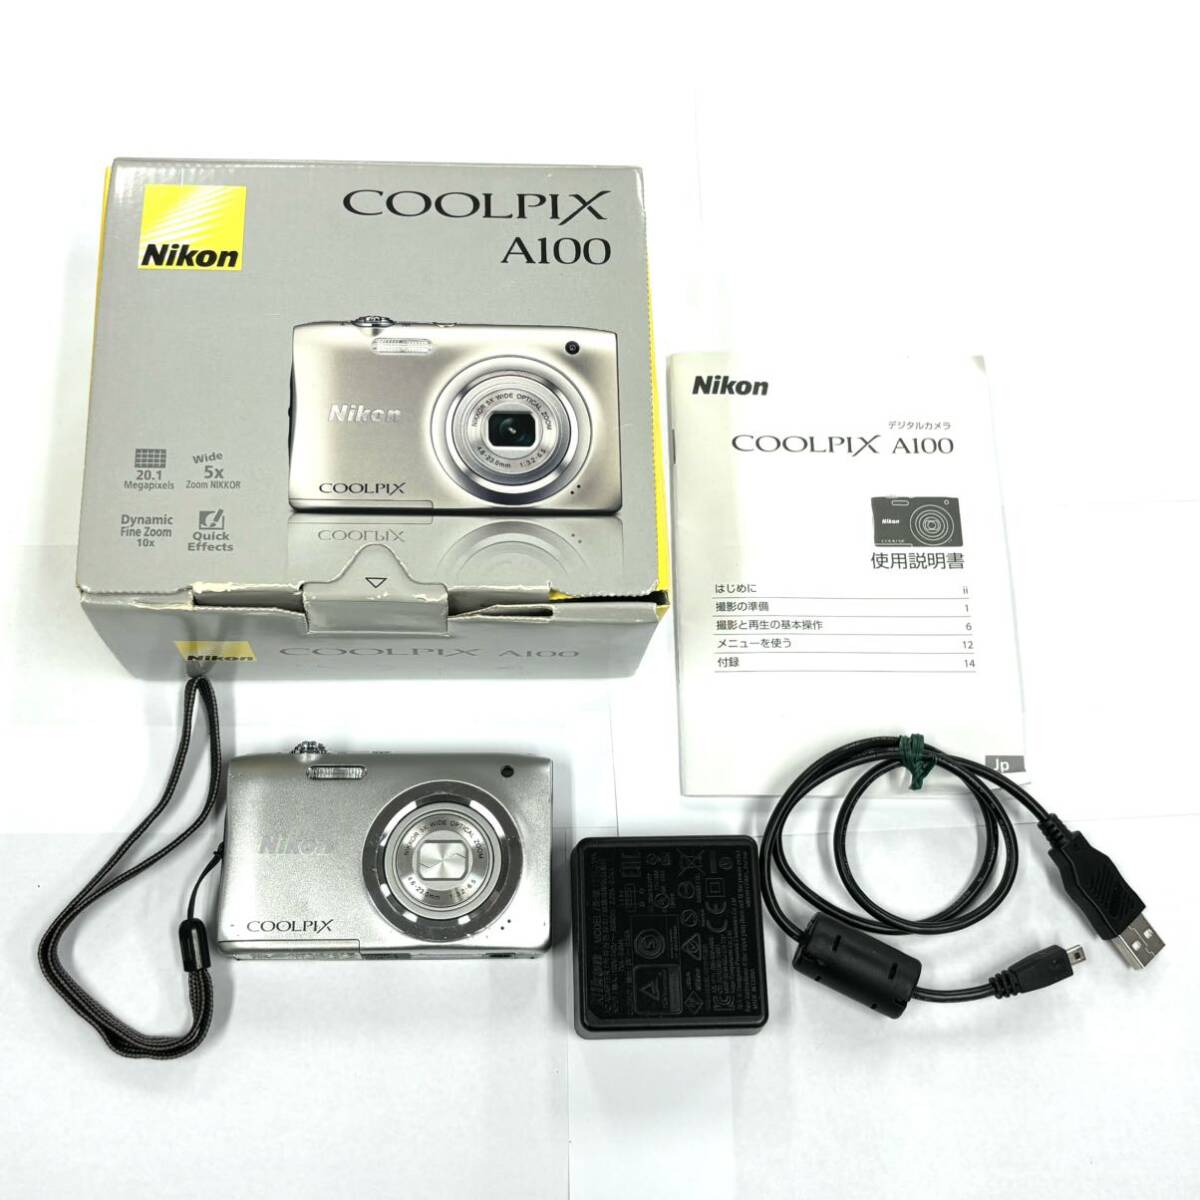 H2891 カメラ デジカメ Nikon ニコン COOLPIX A100 NIKKOR 5× WIDE OPTICAL ZOOM 4.6-23.0mm 1:3.2-6.5 ジャンク品 中古 訳あり の画像1